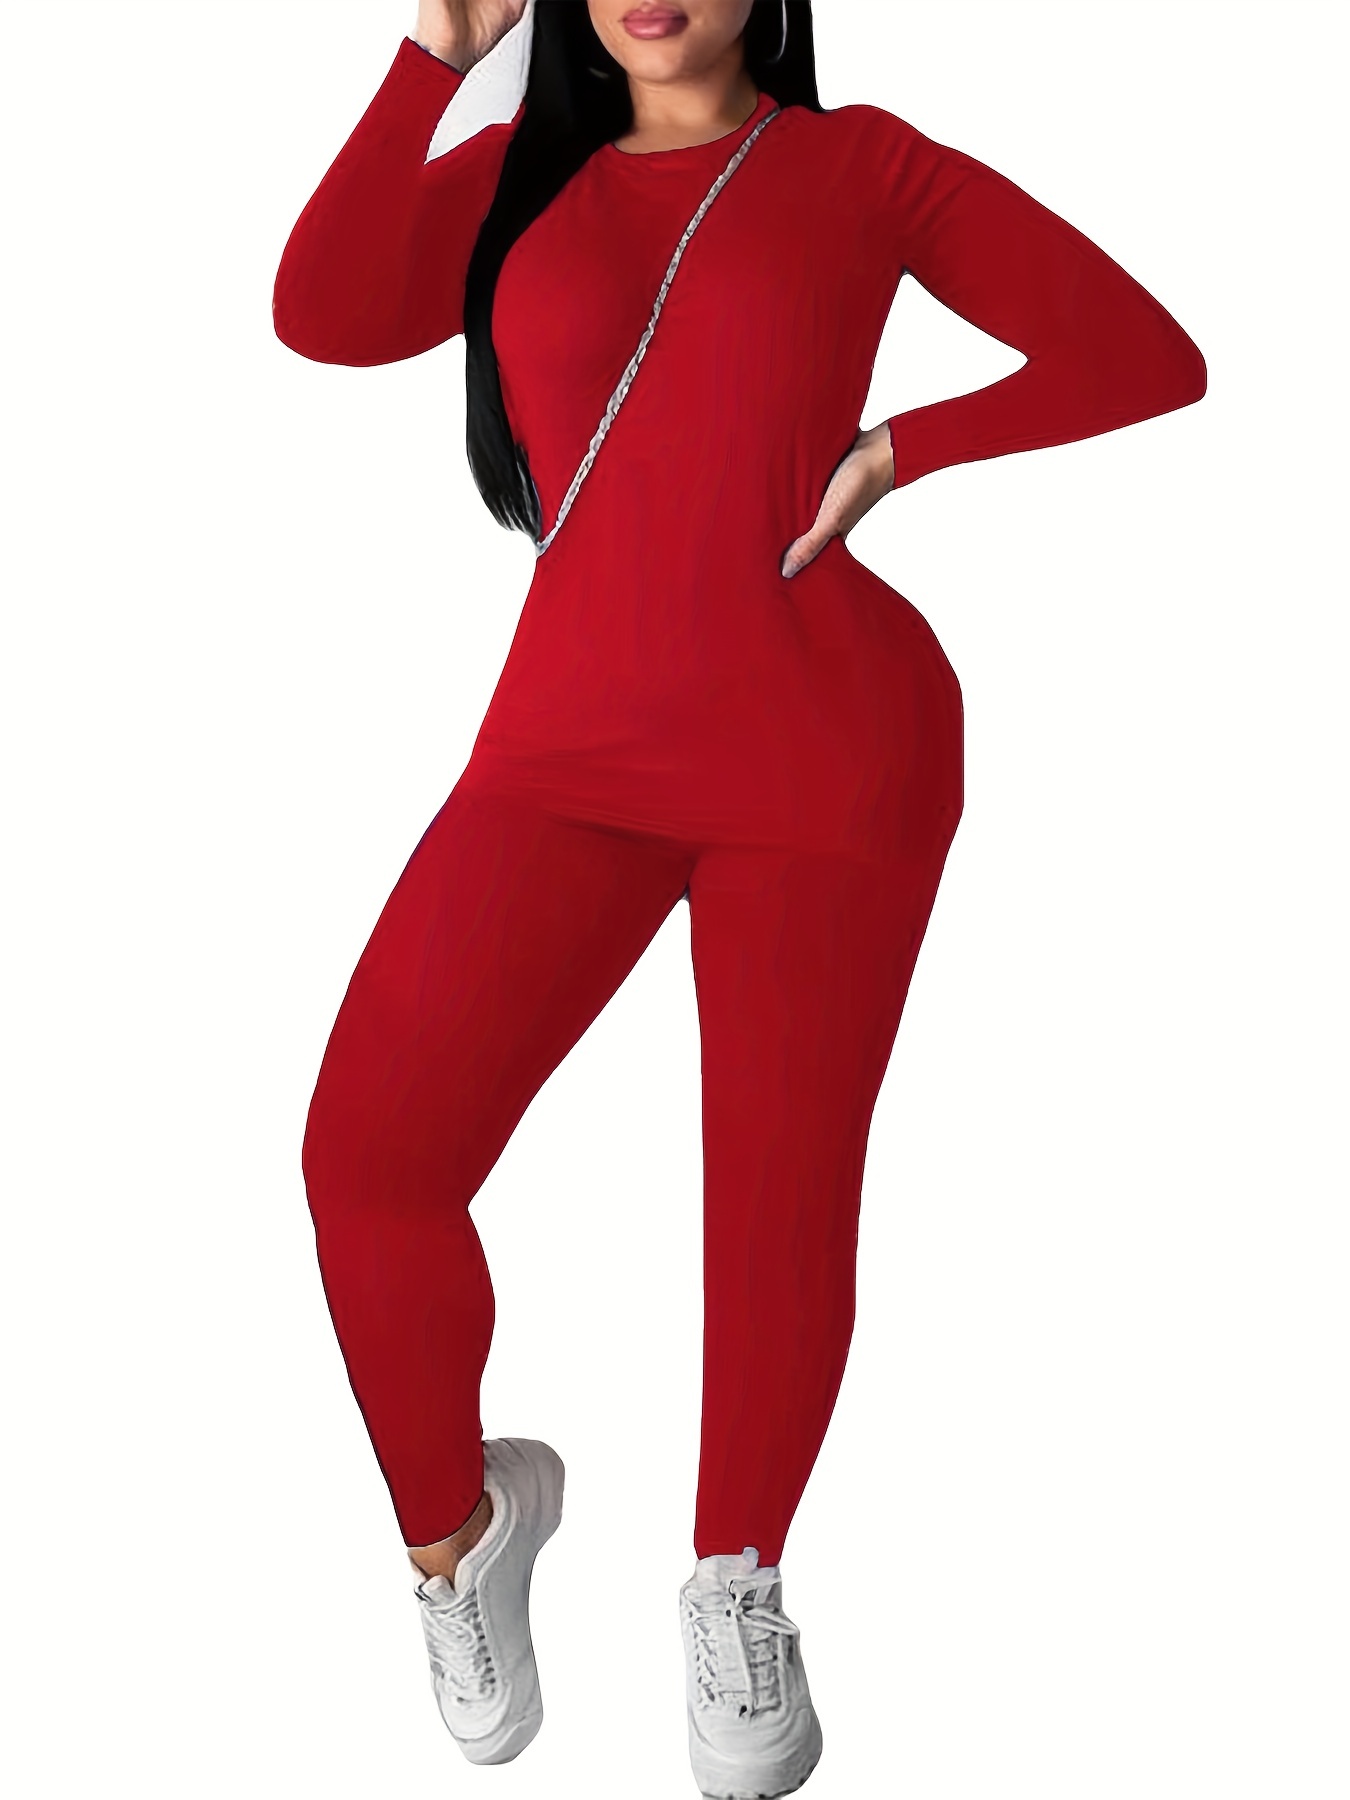 Women Full Length Solid T-Shirt Set With Leggings Red Small Red Small 